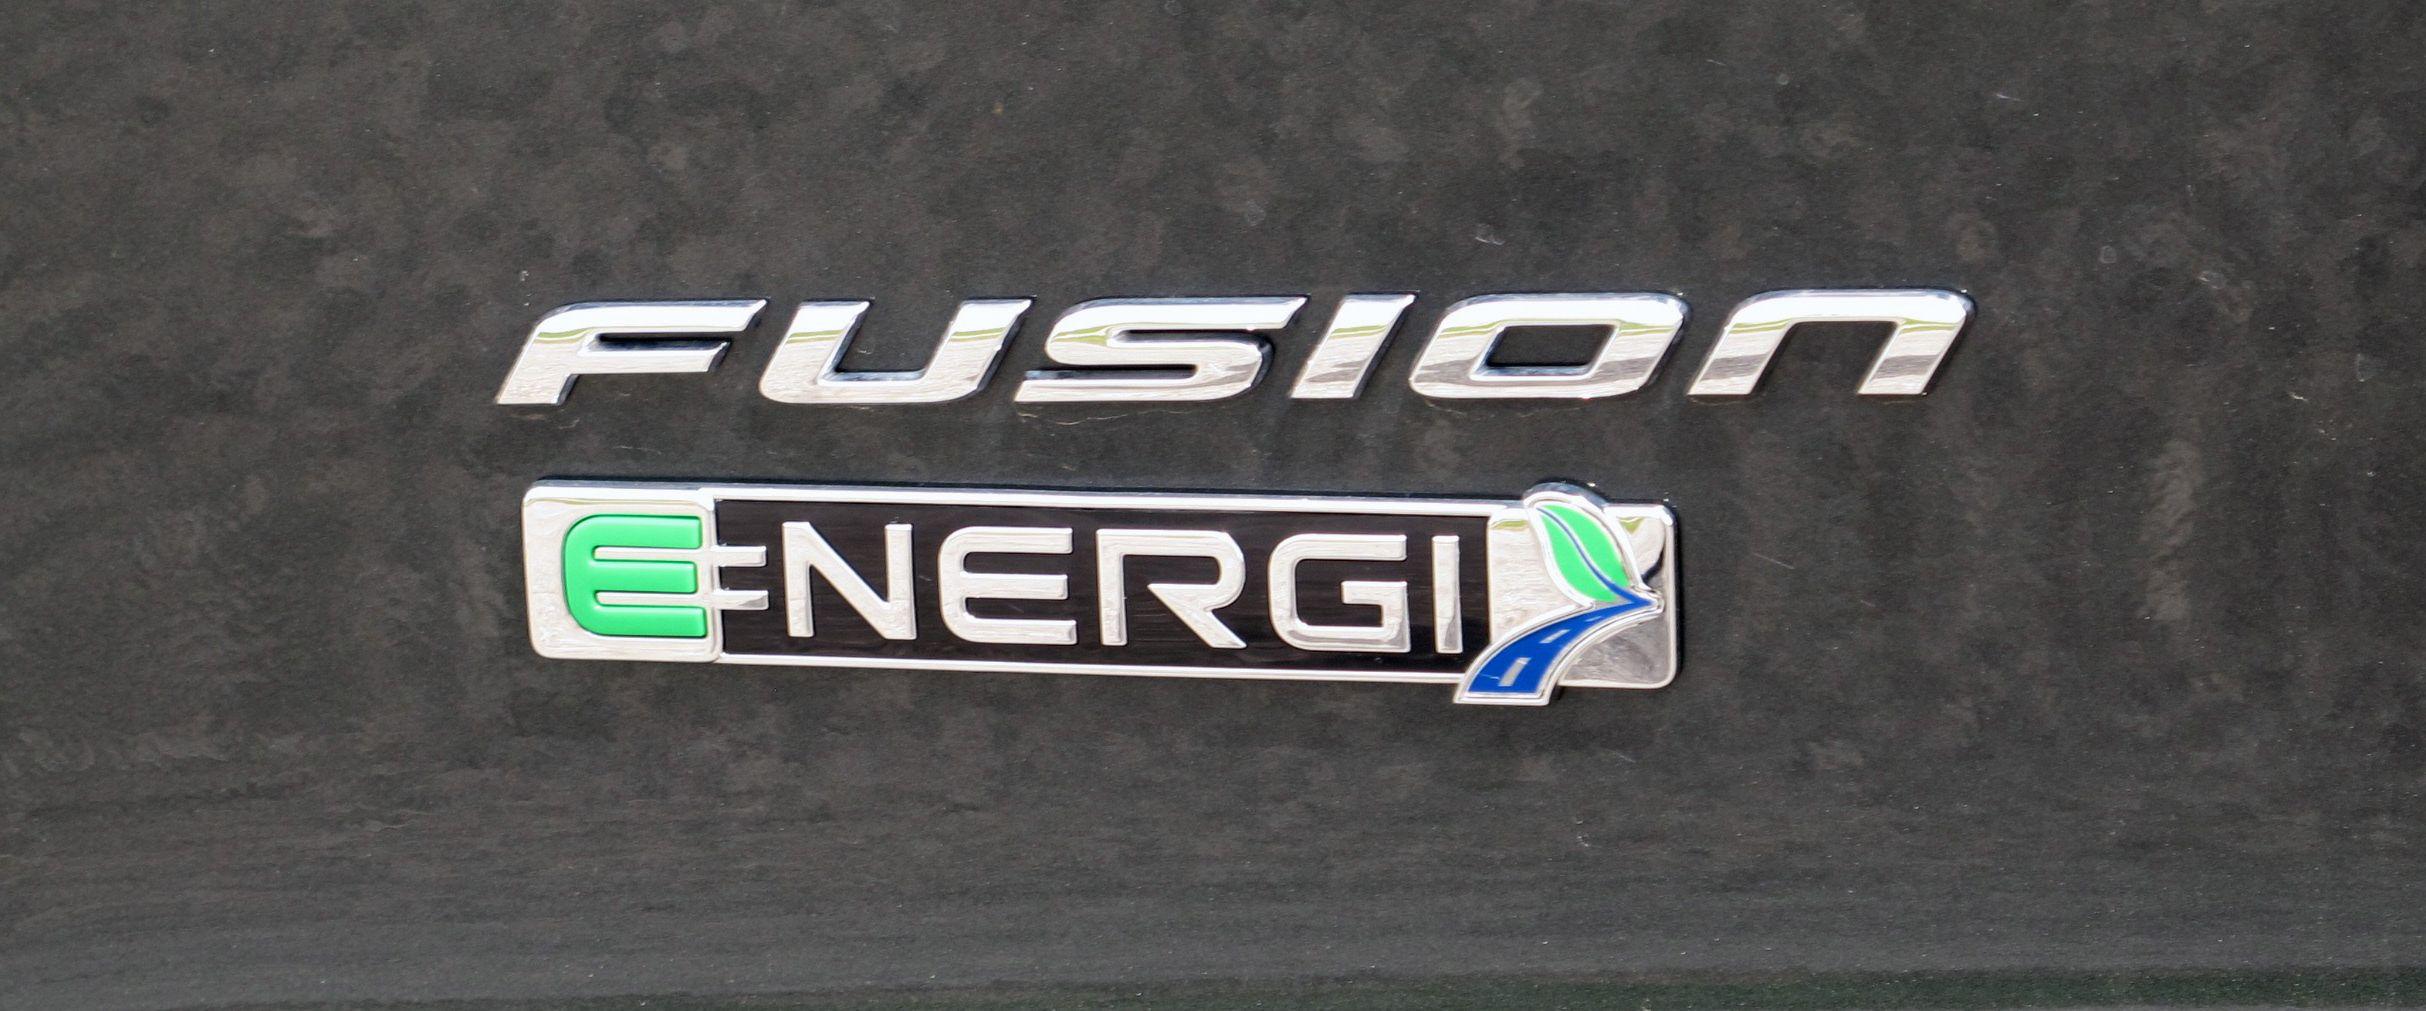 Ford Fusion Logo - Ford Fusion Energi Review